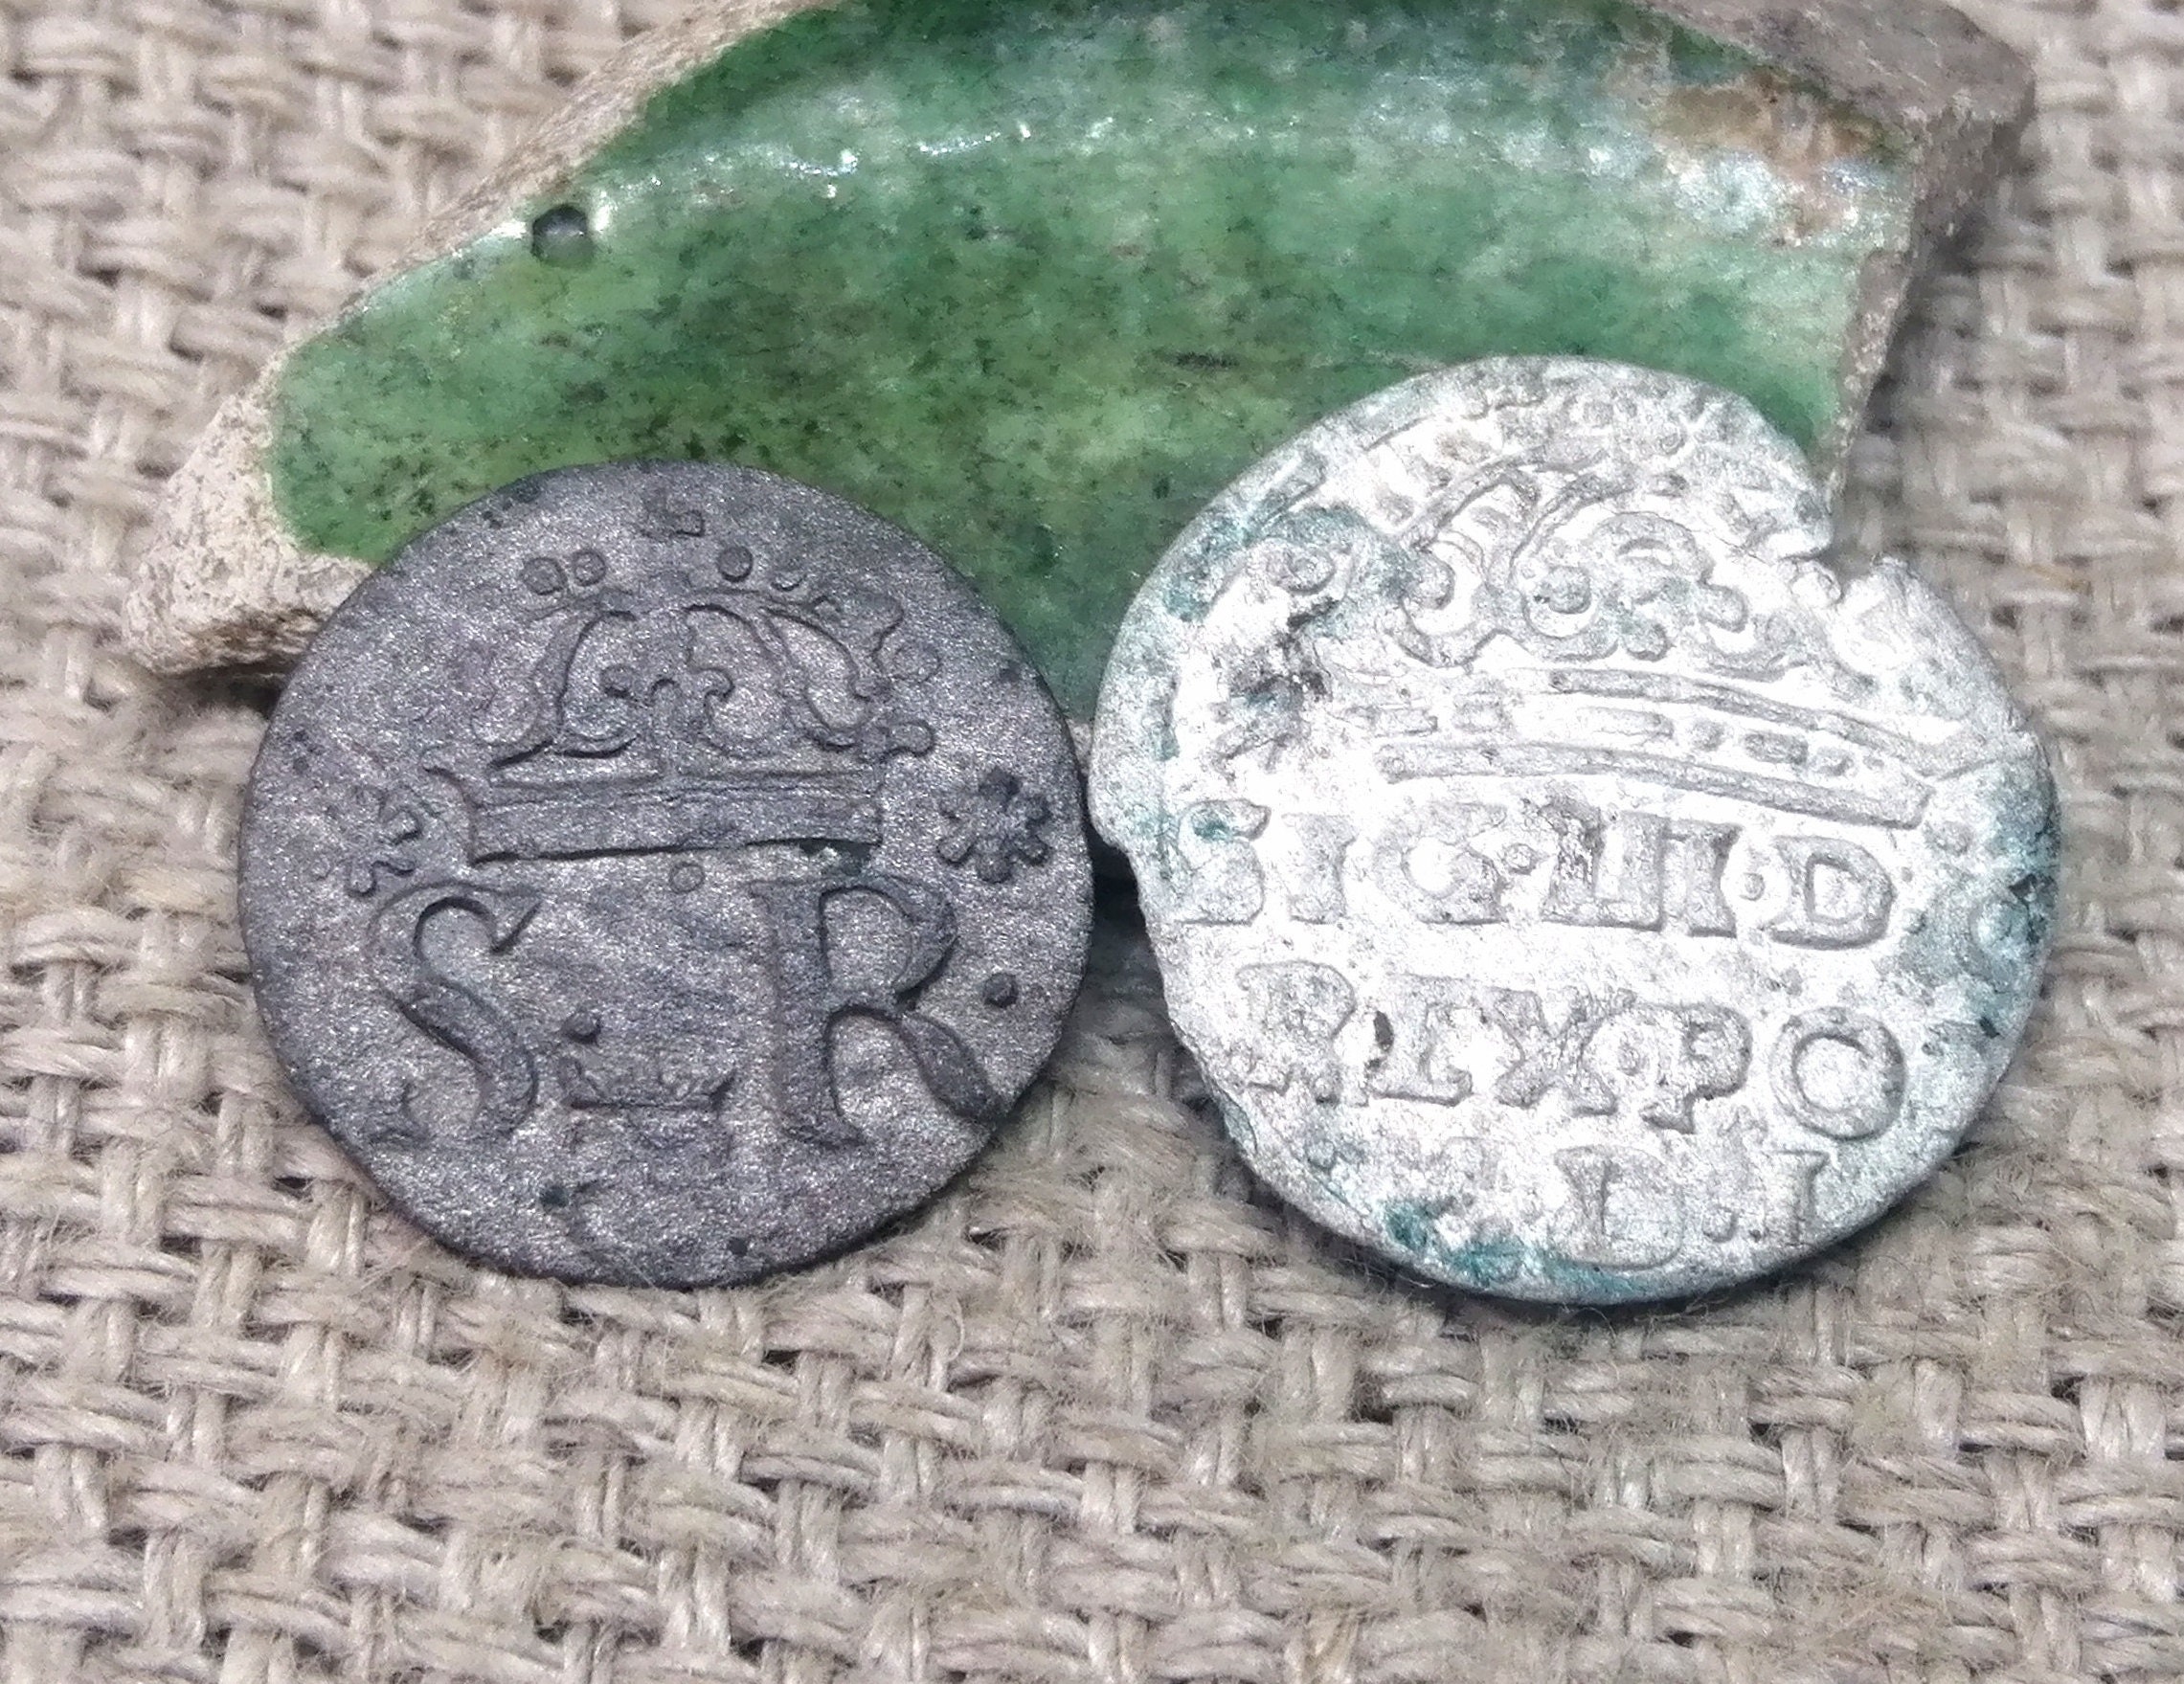 Authentic Silver Medieval European Coins. Medieval 2 Silver Polish-Lithuanian Coins